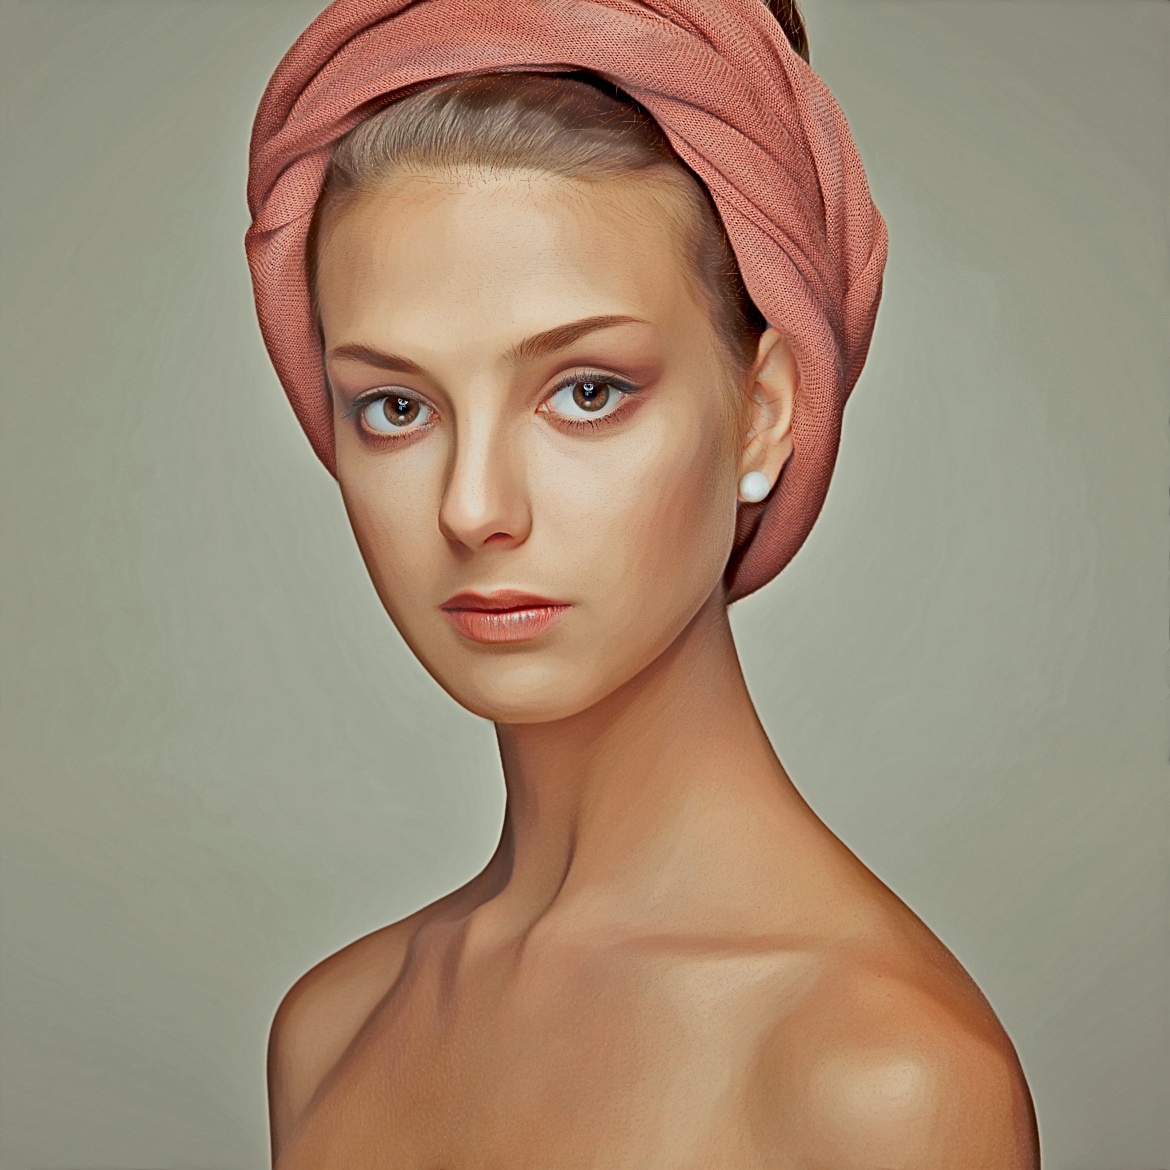 oil painting photoshop cc 2015 download